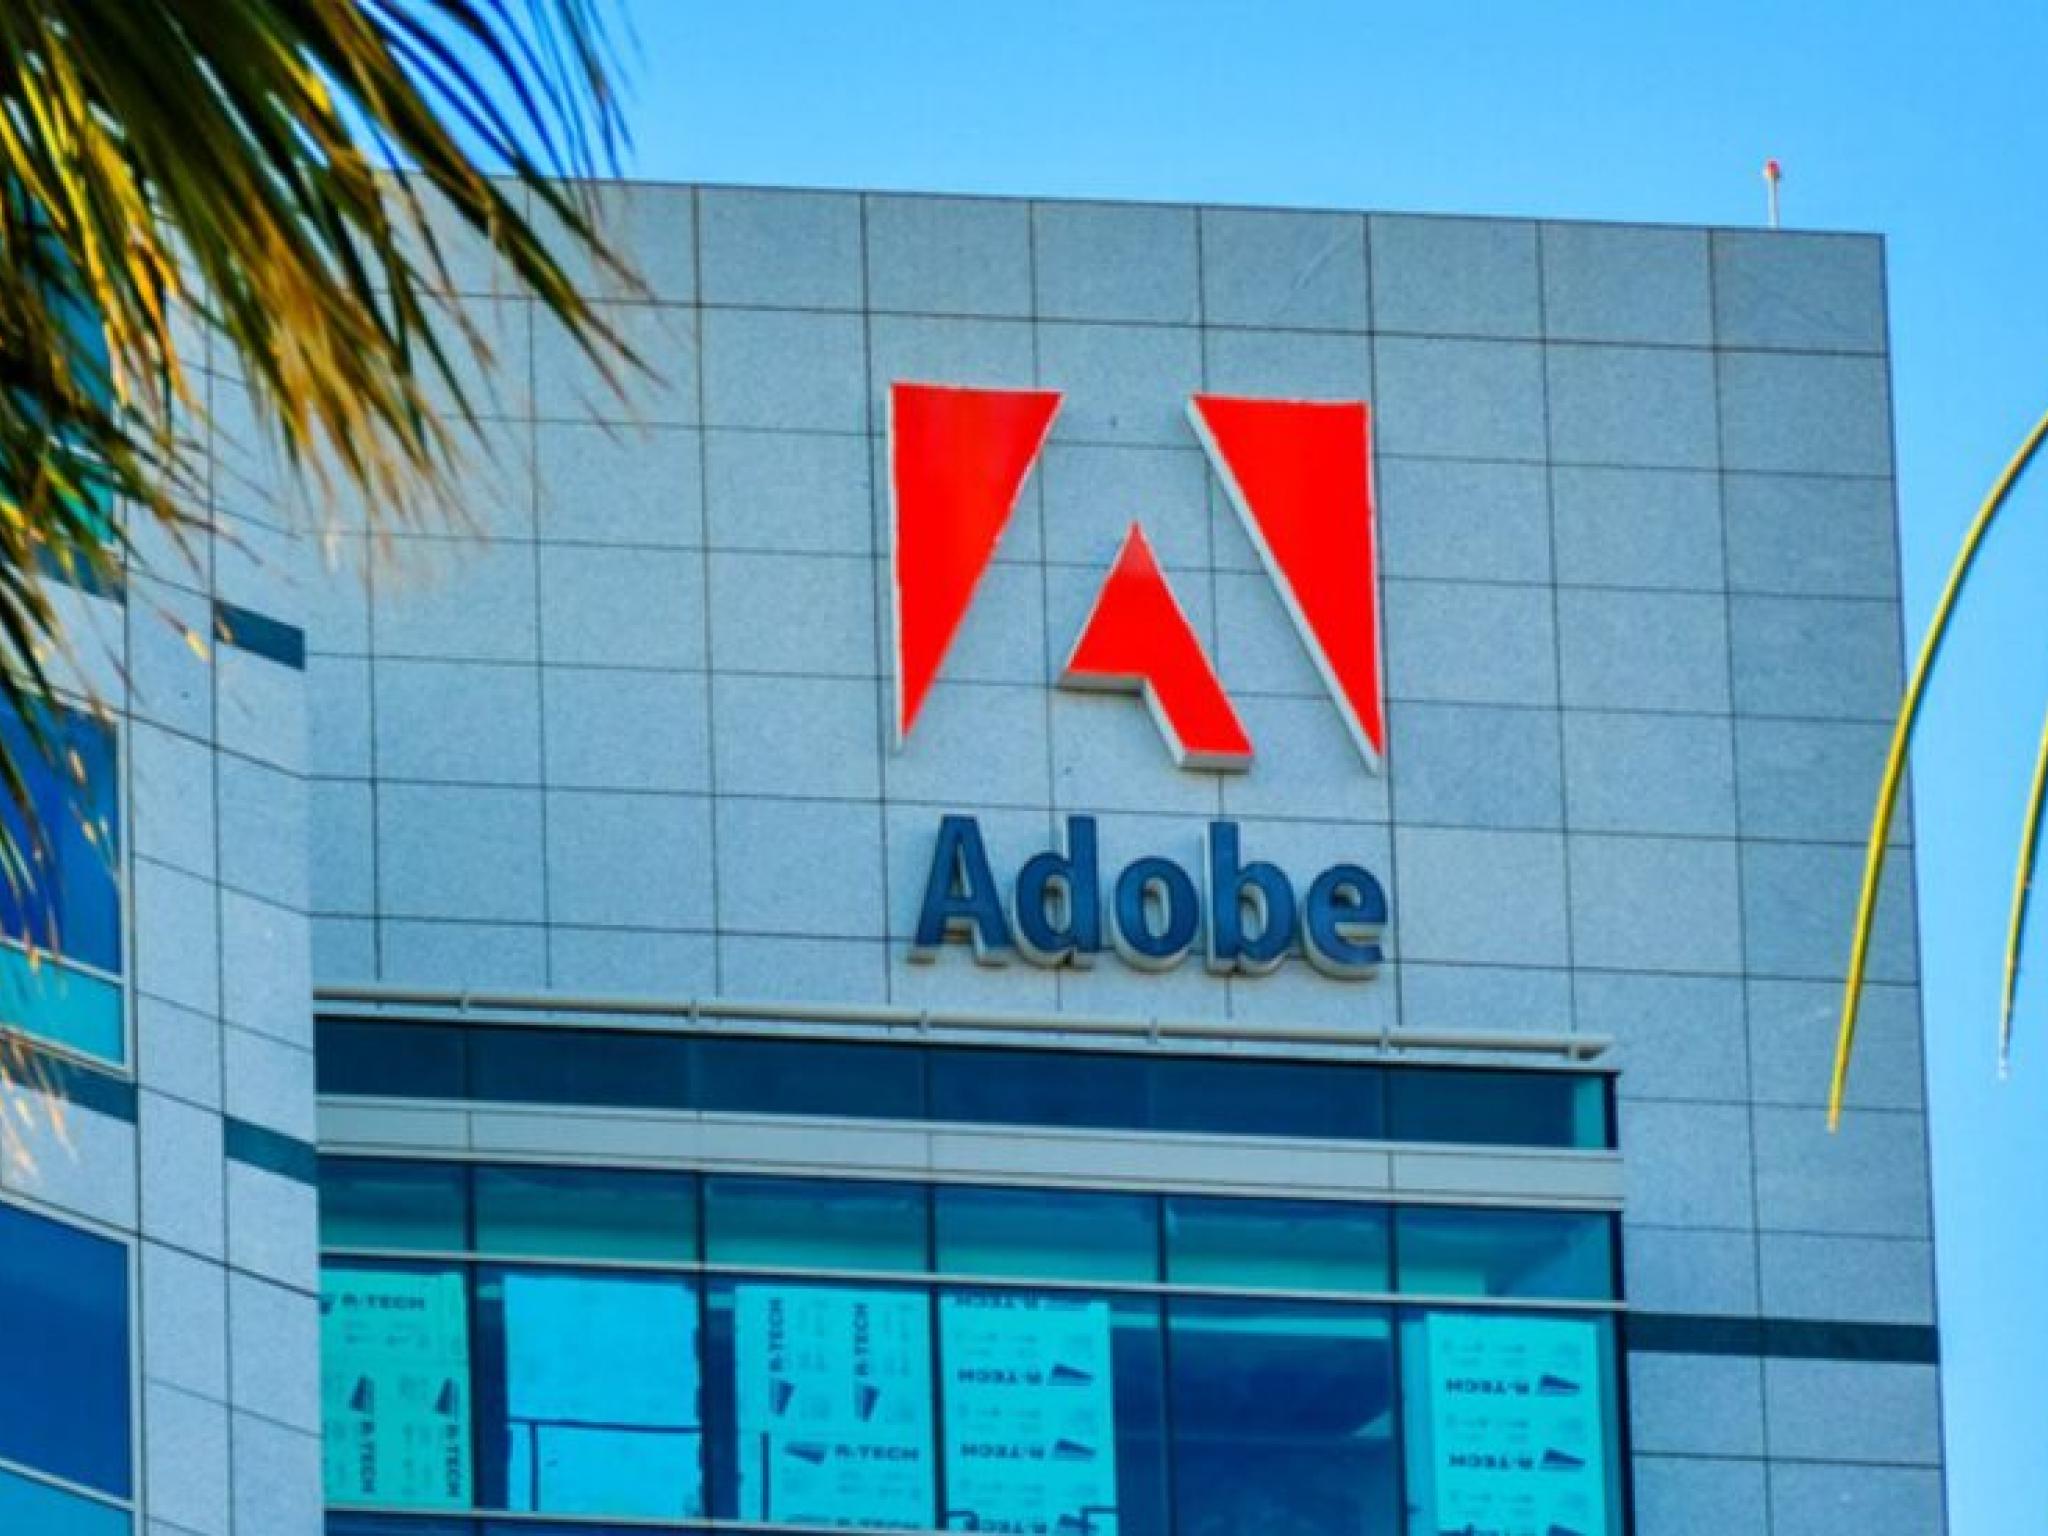  adobe-expects-to-deliver-in-a-bigger-way-6-analysts-address-key-metrics-positive-ai-commentary 